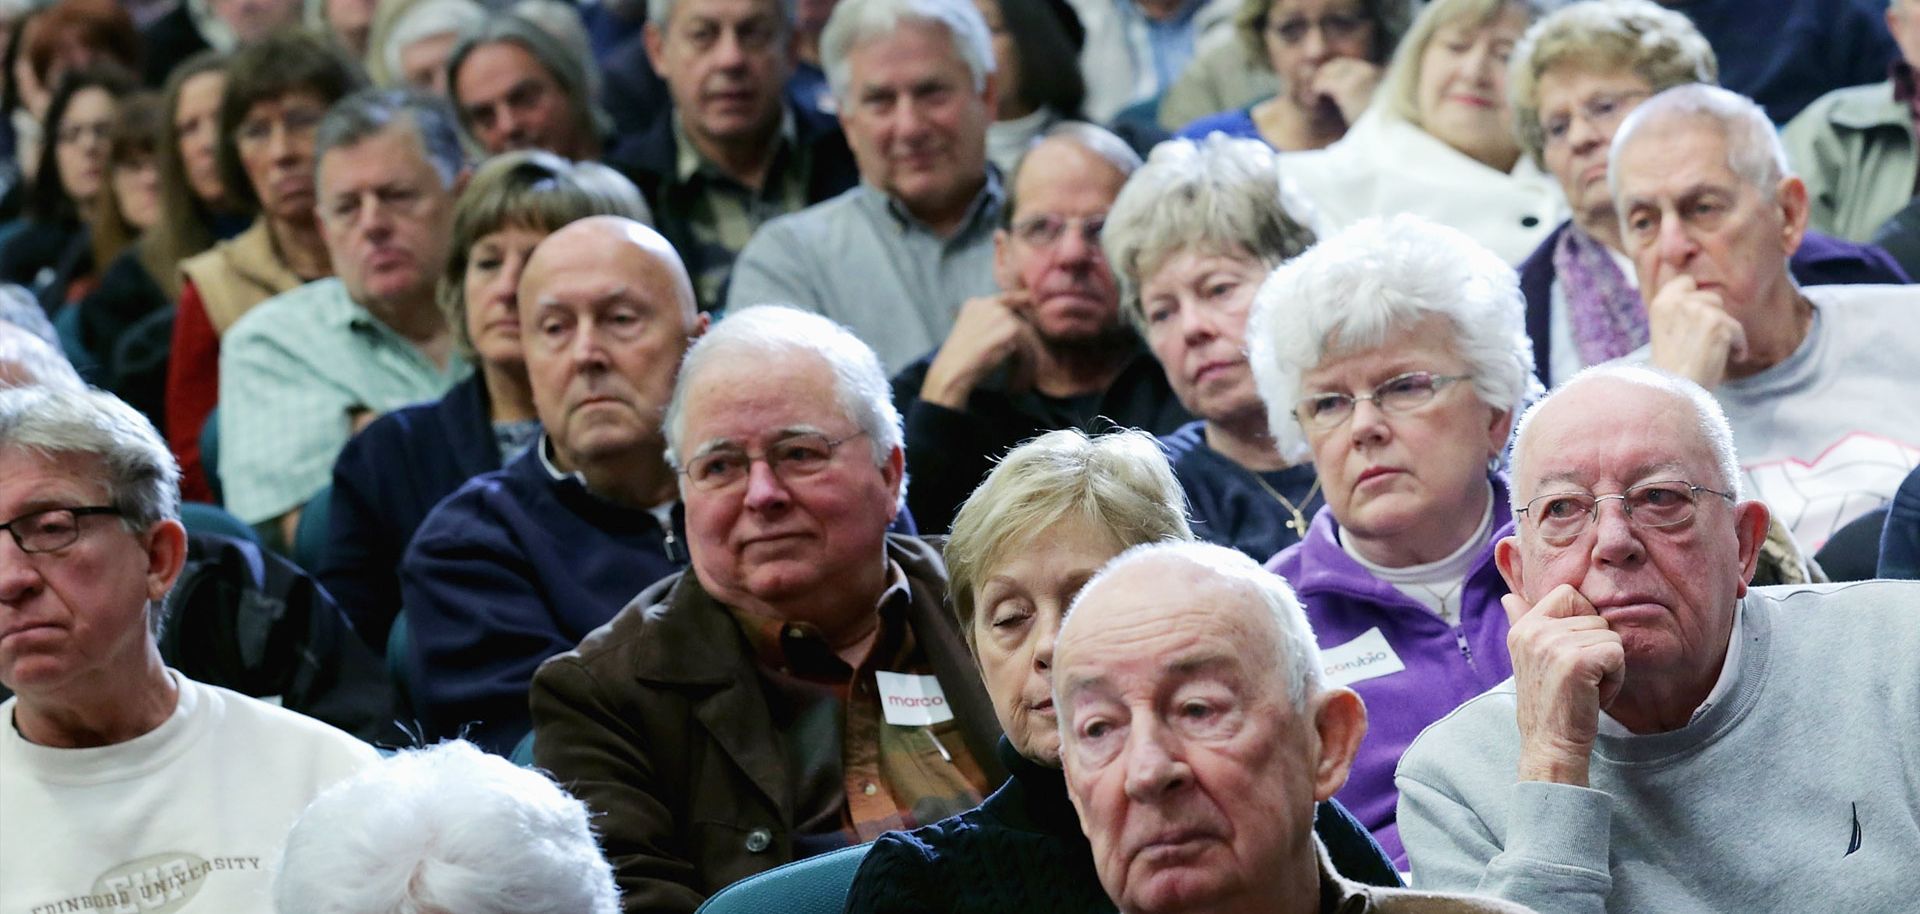 Senior citizens listen to a political candidate in Okatie, South Carolina.